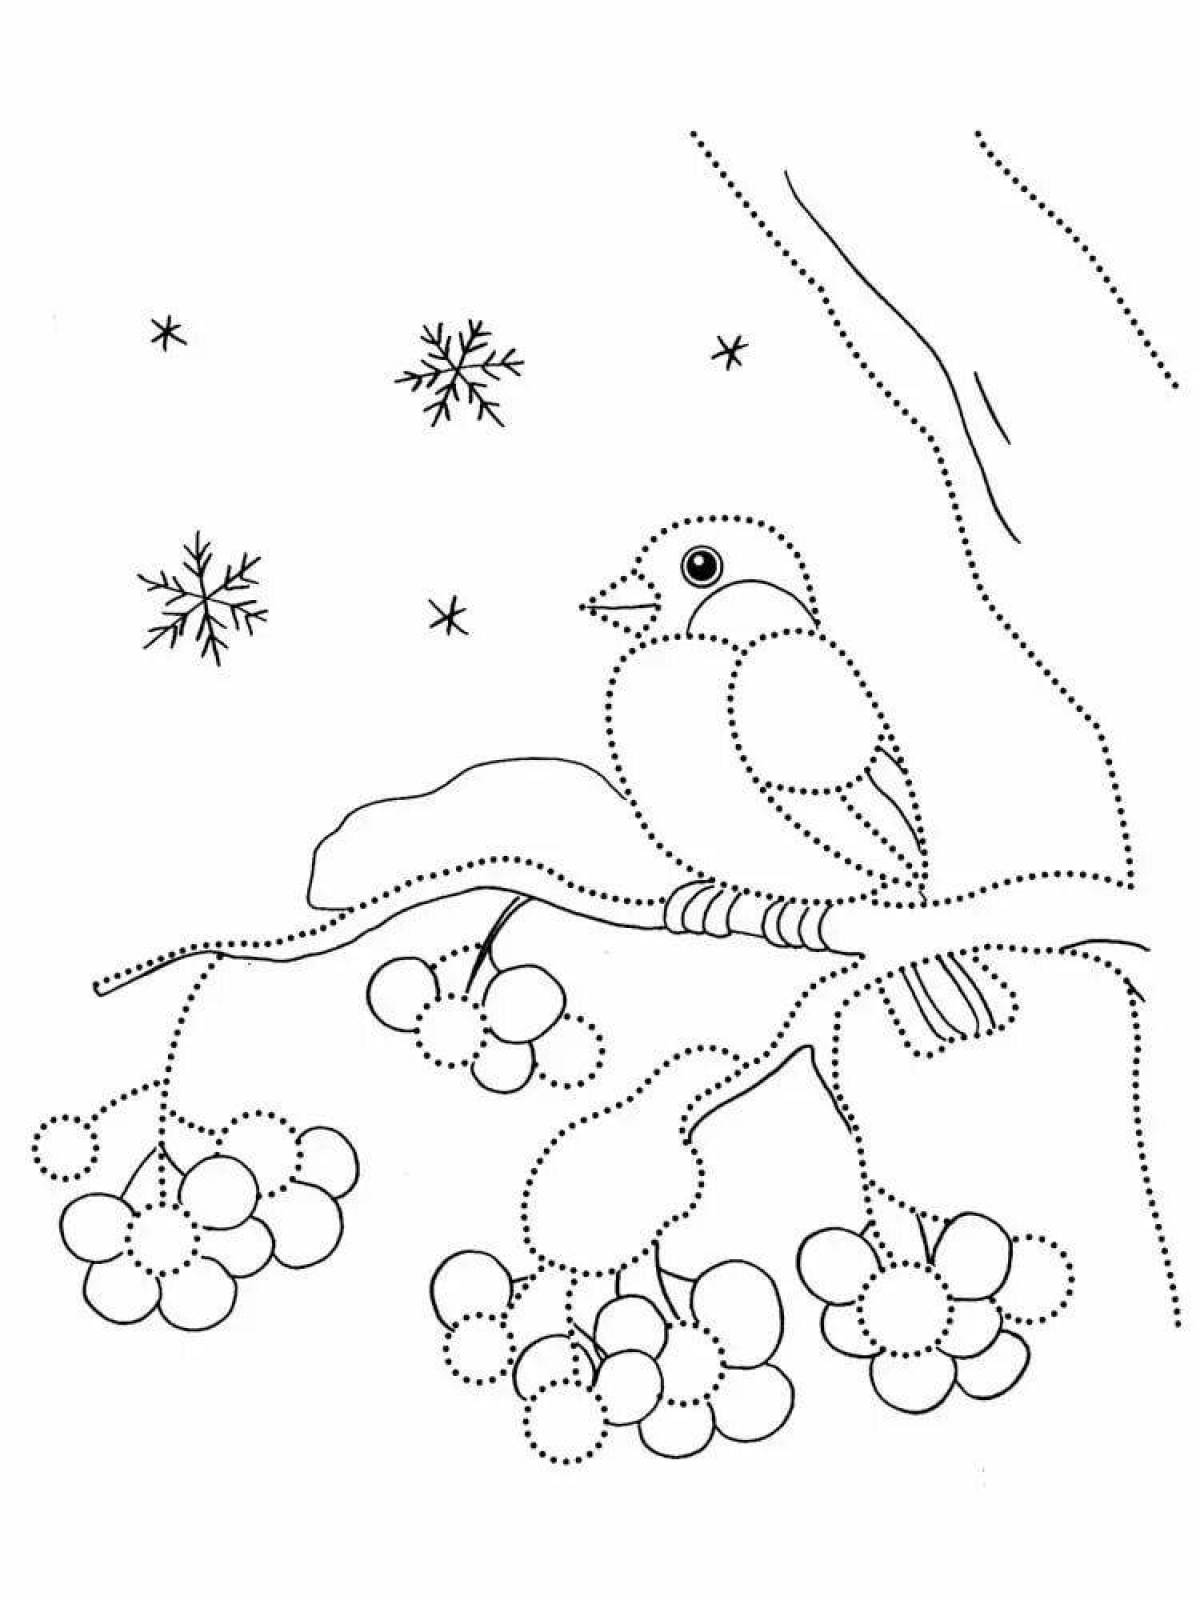 Attractive bullfinch coloring for children 6-7 years old